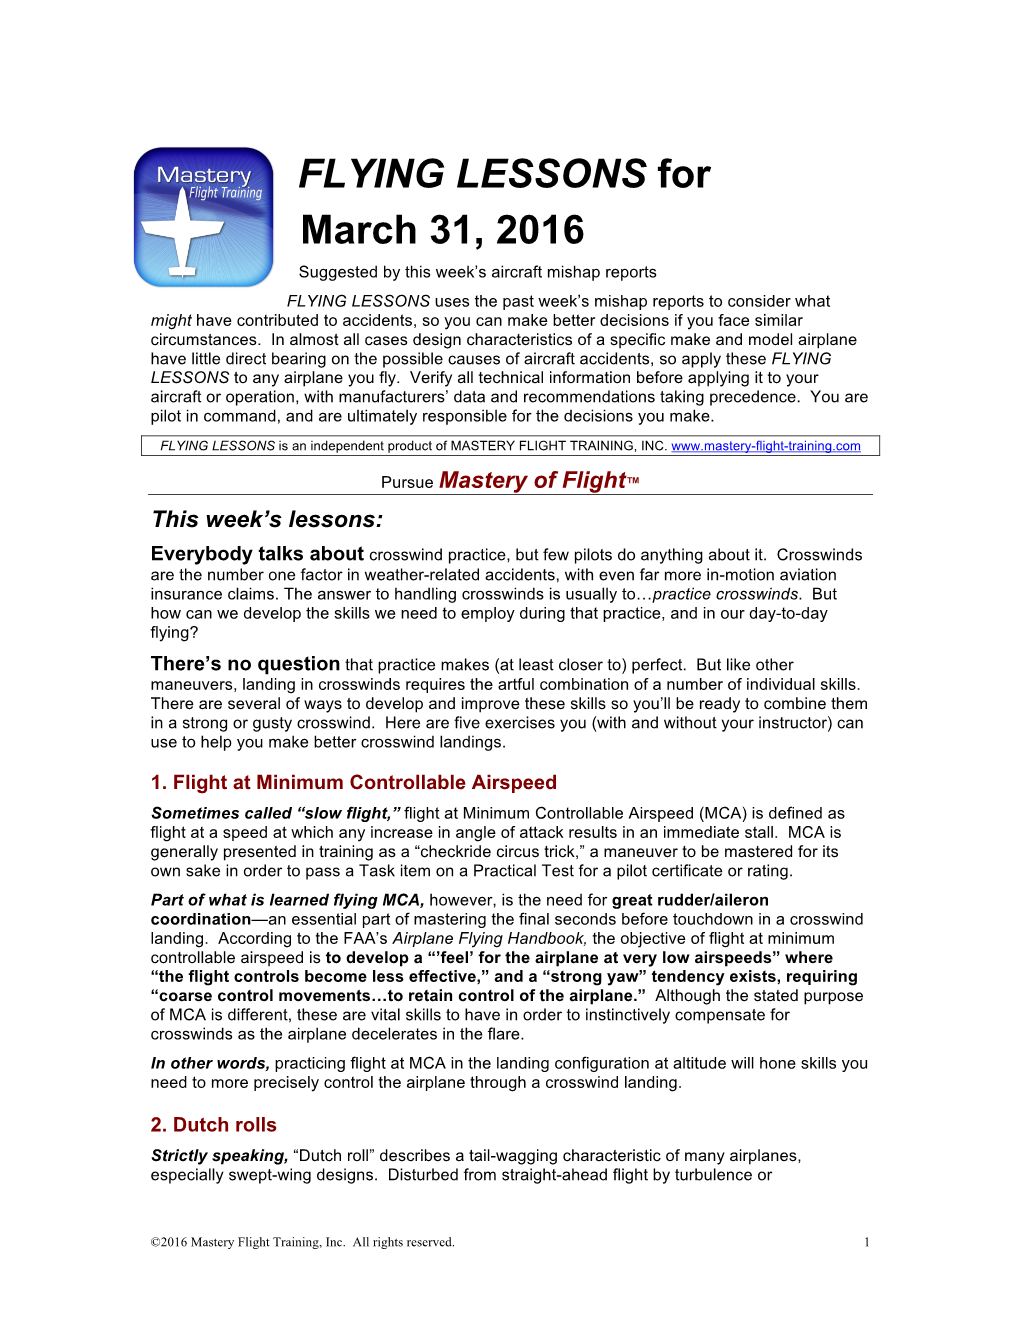 FLYING LESSONS for March 31, 2016